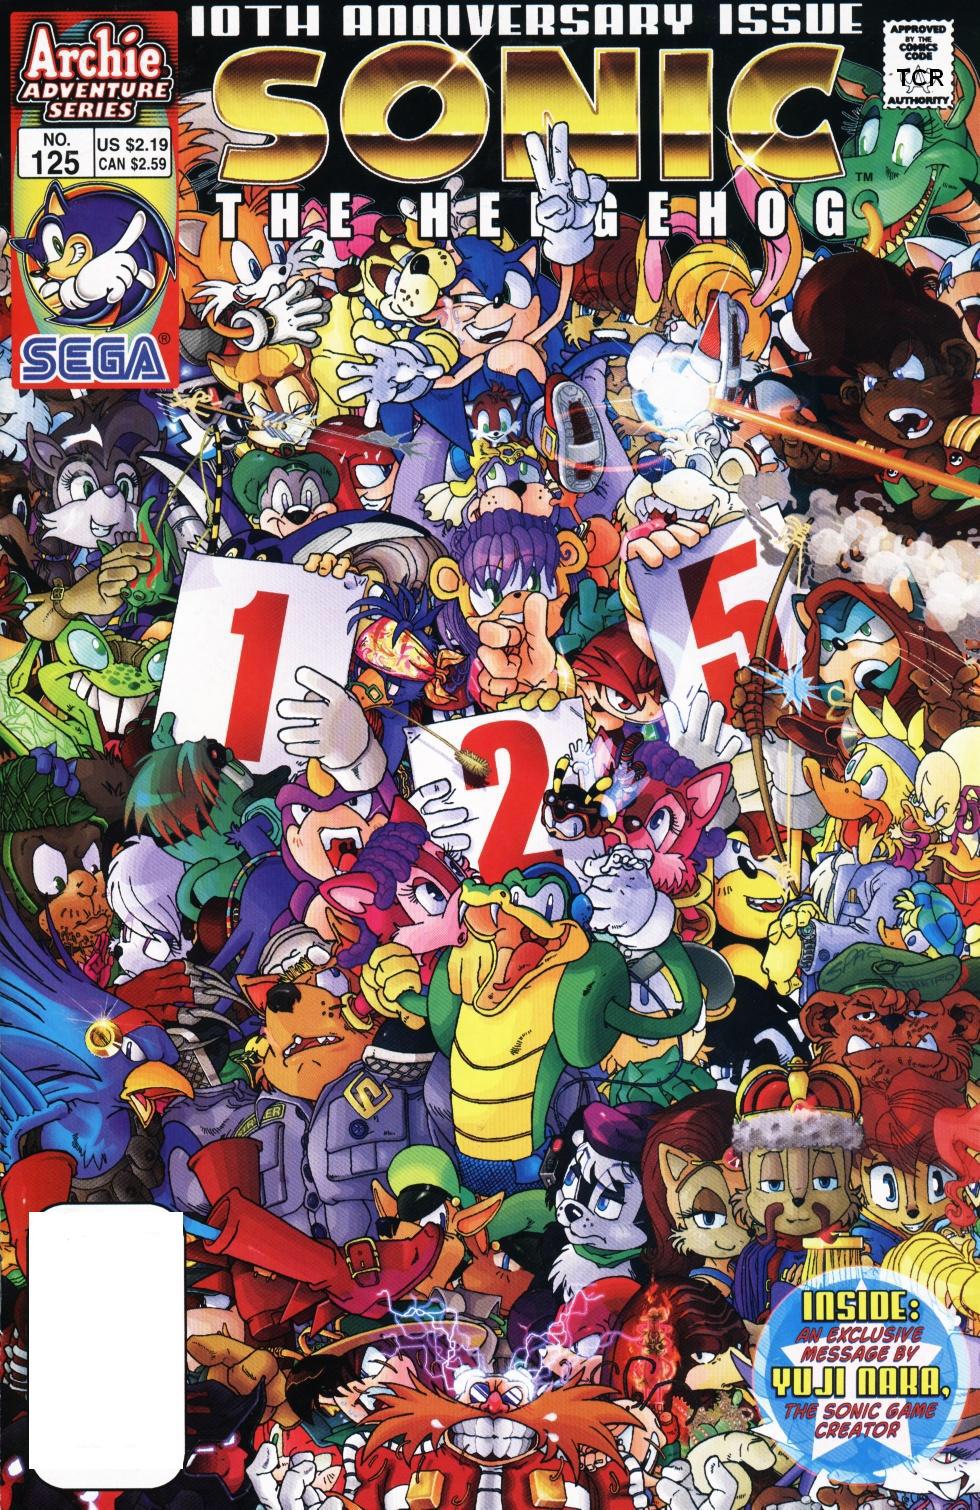 Archie Sonic the Hedgehog Issue 125 - Sonic News Network, the ...